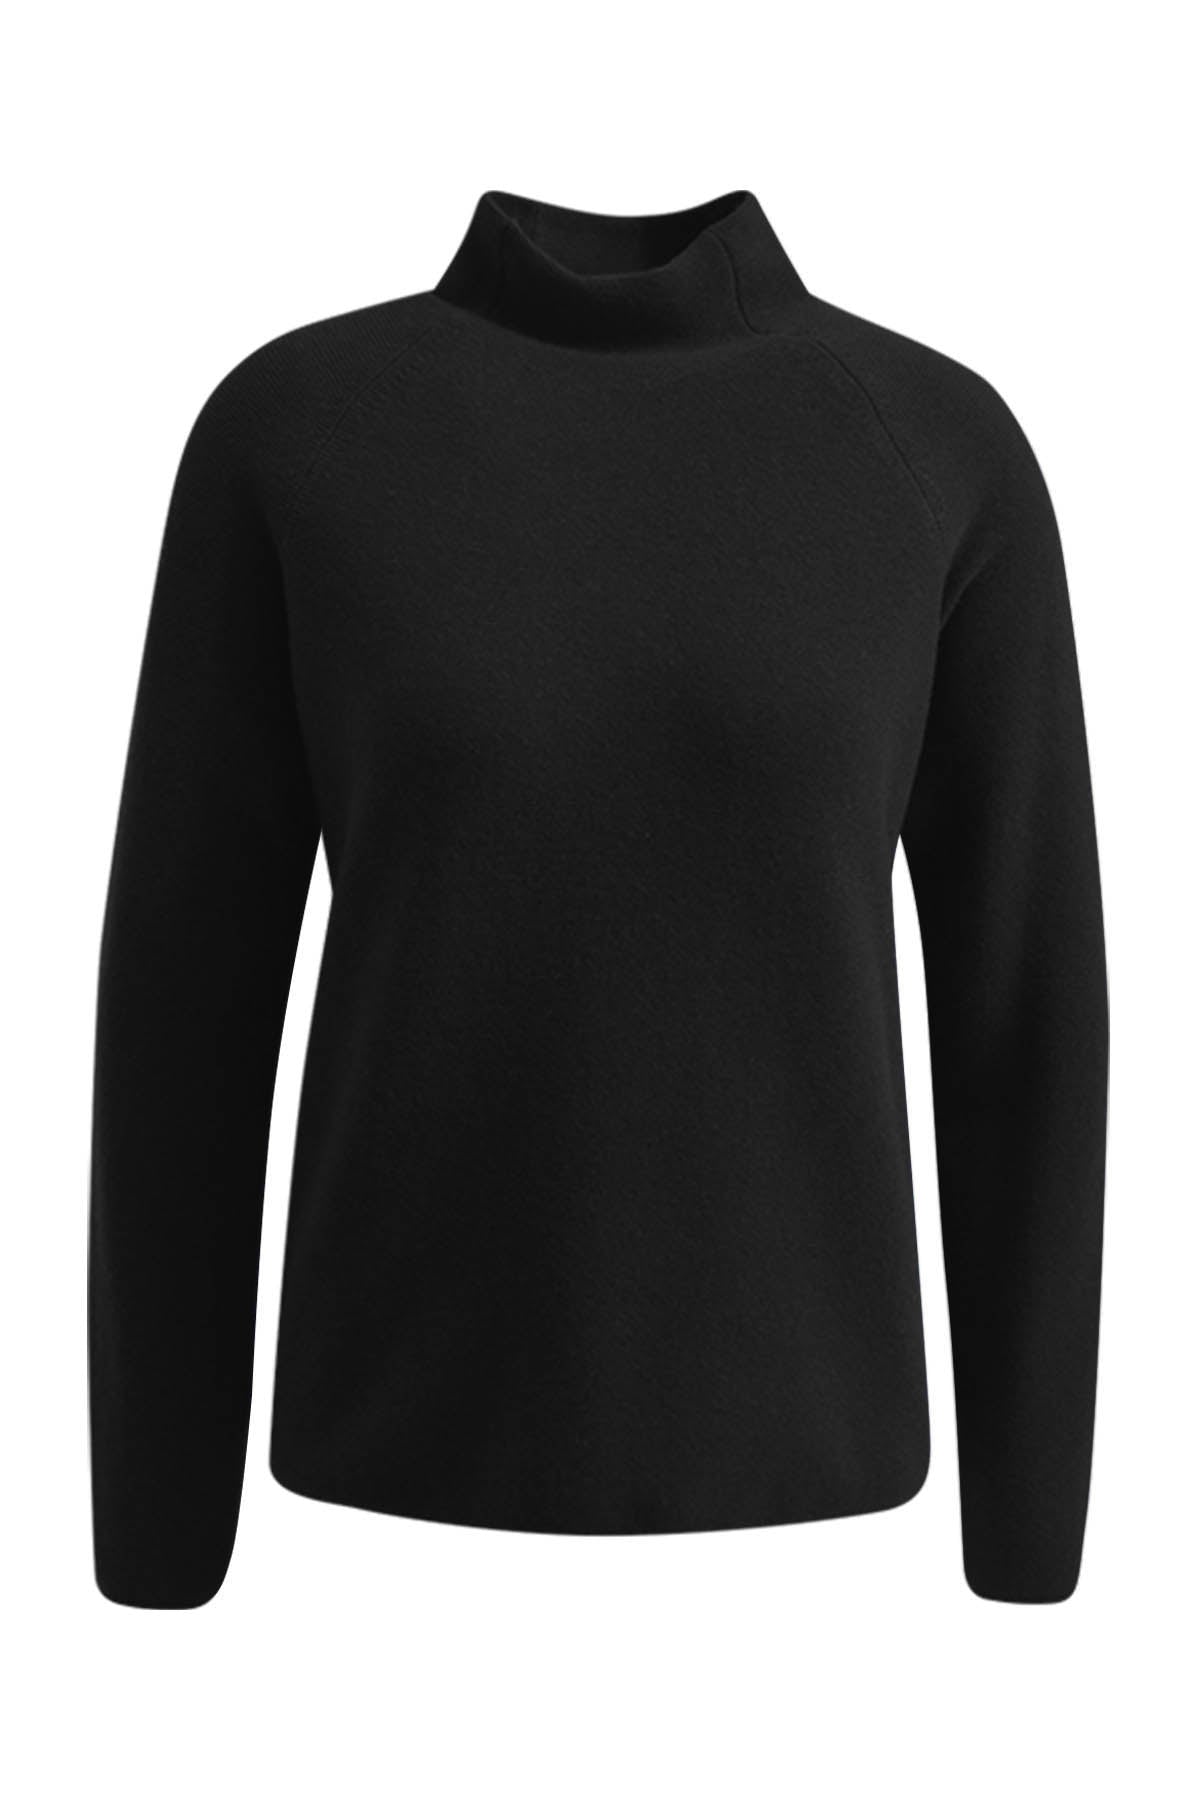 Links Links Stand Collar Pullover - Black